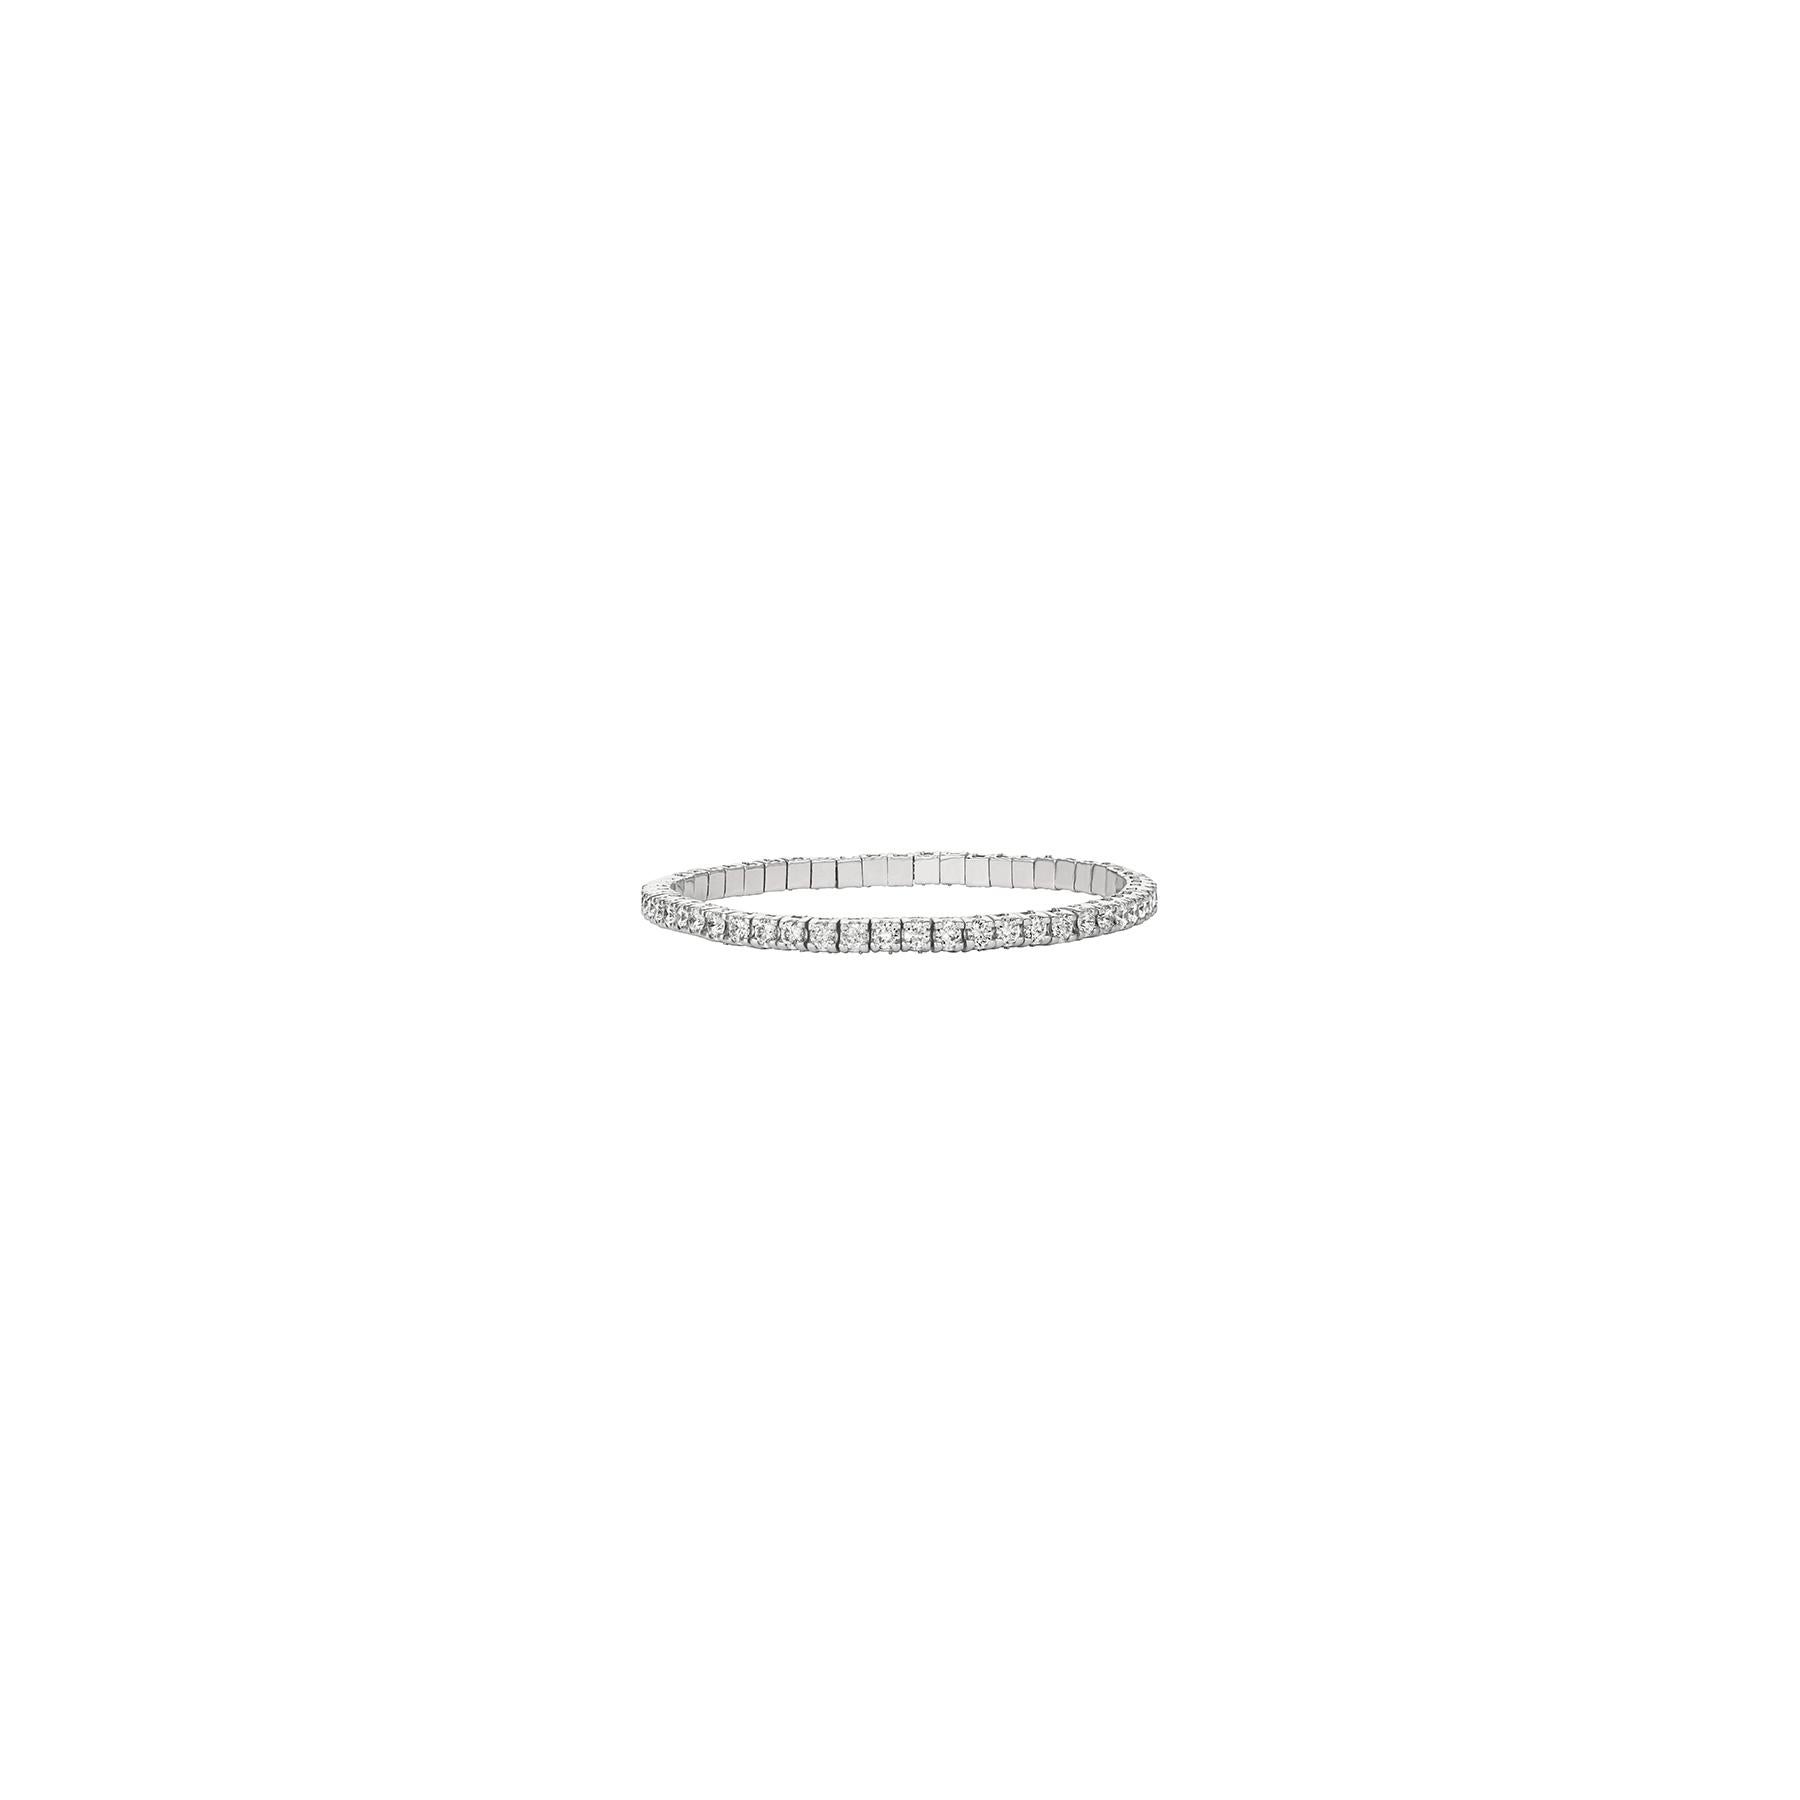 9.00 Carat Natural Diamond Stretch Style Bracelet G-H SI 14K White Gold

100% Natural Diamonds, Not Enhanced in any way
9.00CT
G-H 
SI  
14K White Gold, Prong set, 16.5 Grams
7 inches in length, 3/16 inch in width
43 Diamonds

B5884-9W
ALL OUR ITEMS